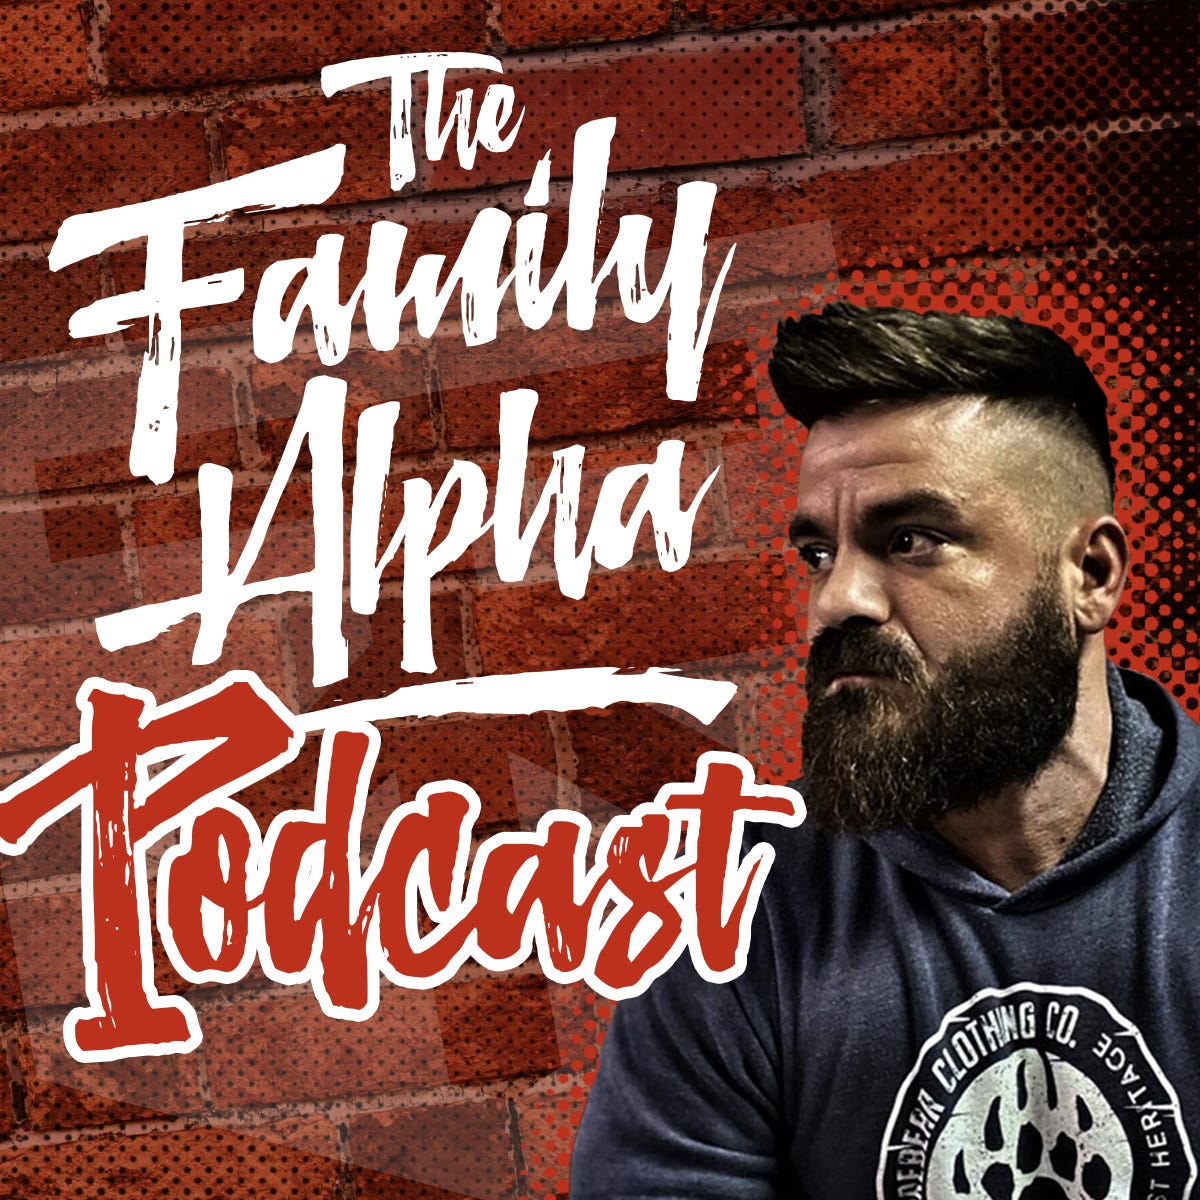 Ep. 212: Fraternity Friday 04 - How an FoE Man Found His Way in Life with Rick Mahoney